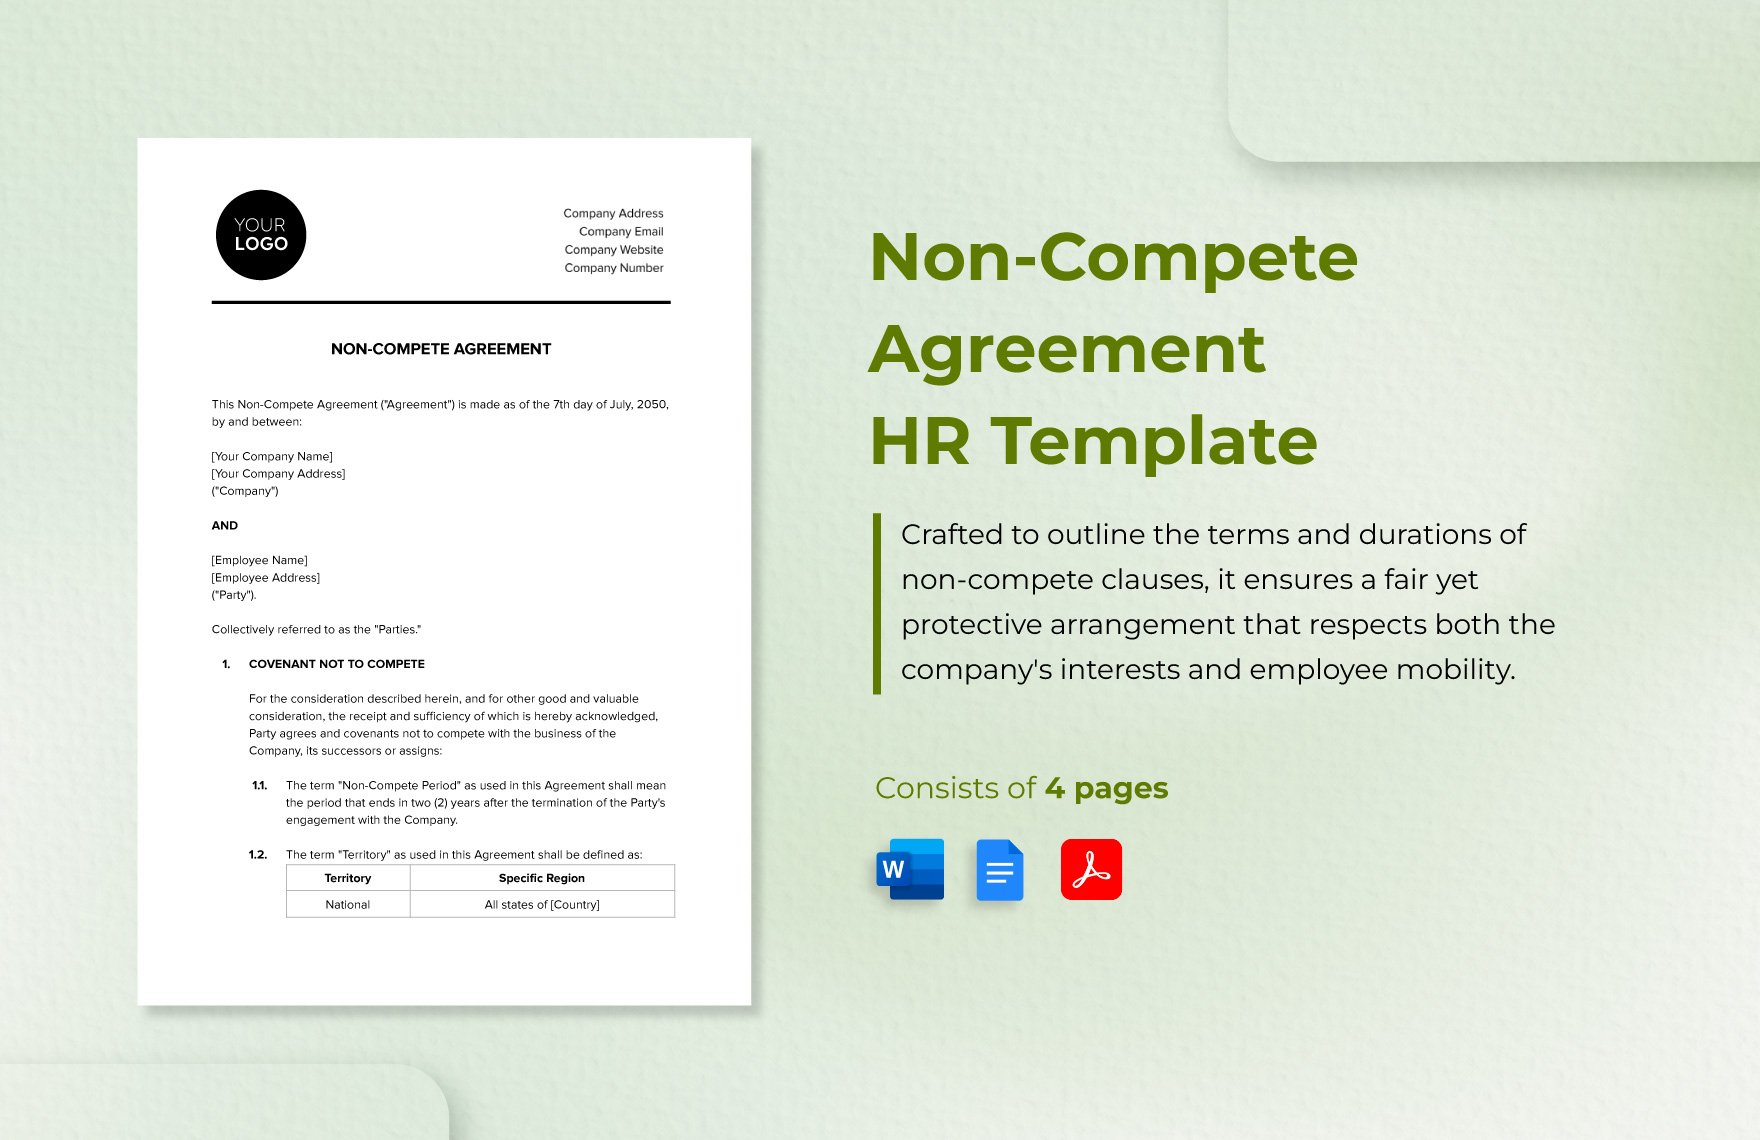 Non-compete Agreement HR Template